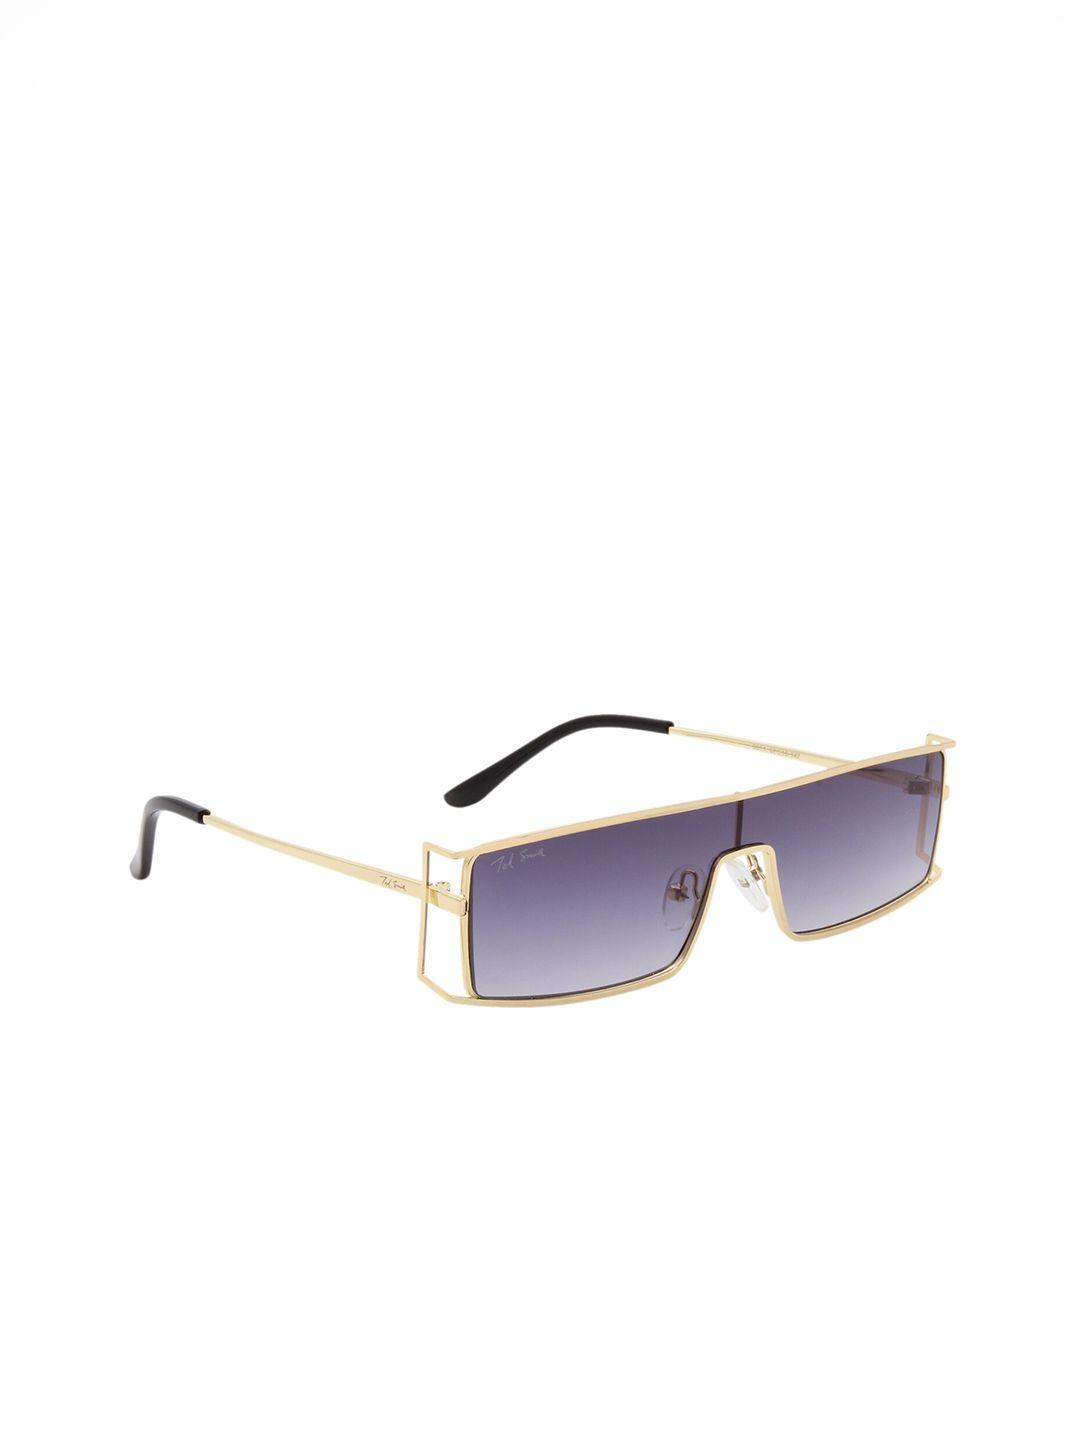 ted smith grey lens & gold-toned shield sunglasses with uv protected lens